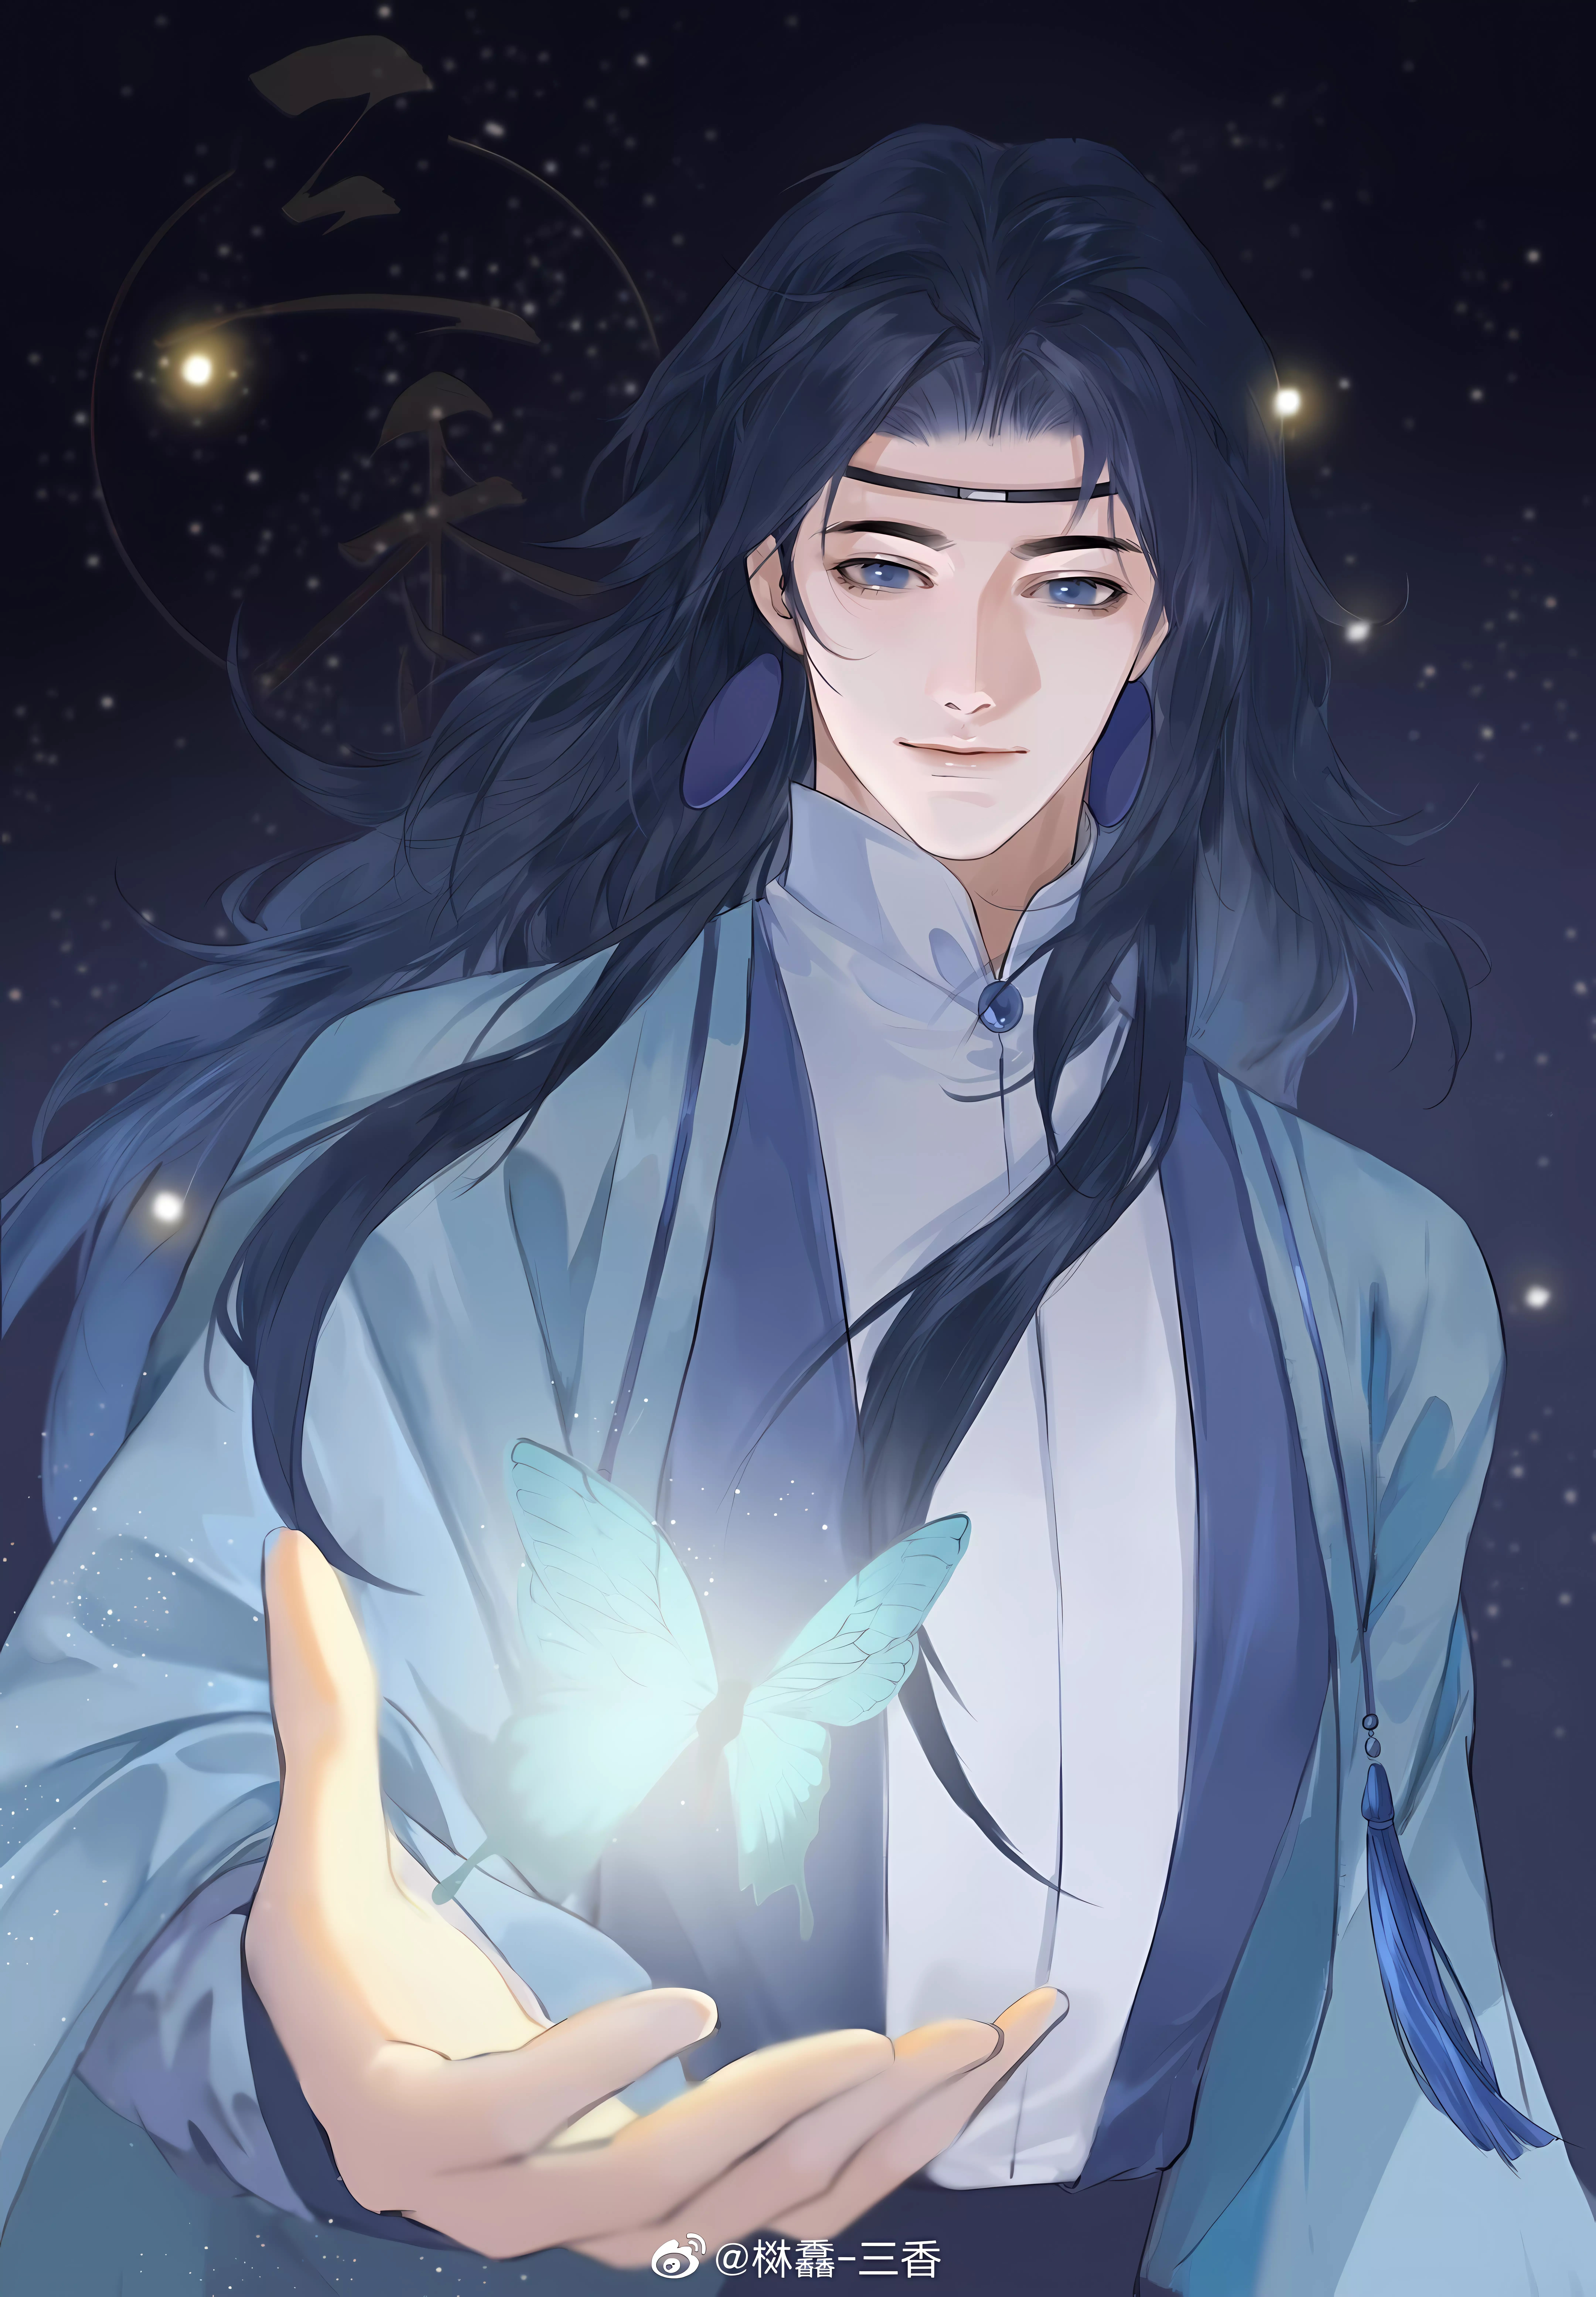 Anime 8640x12432 Dong fang Project manga portrait display anime boys long hair butterfly stars smiling insect watermarked